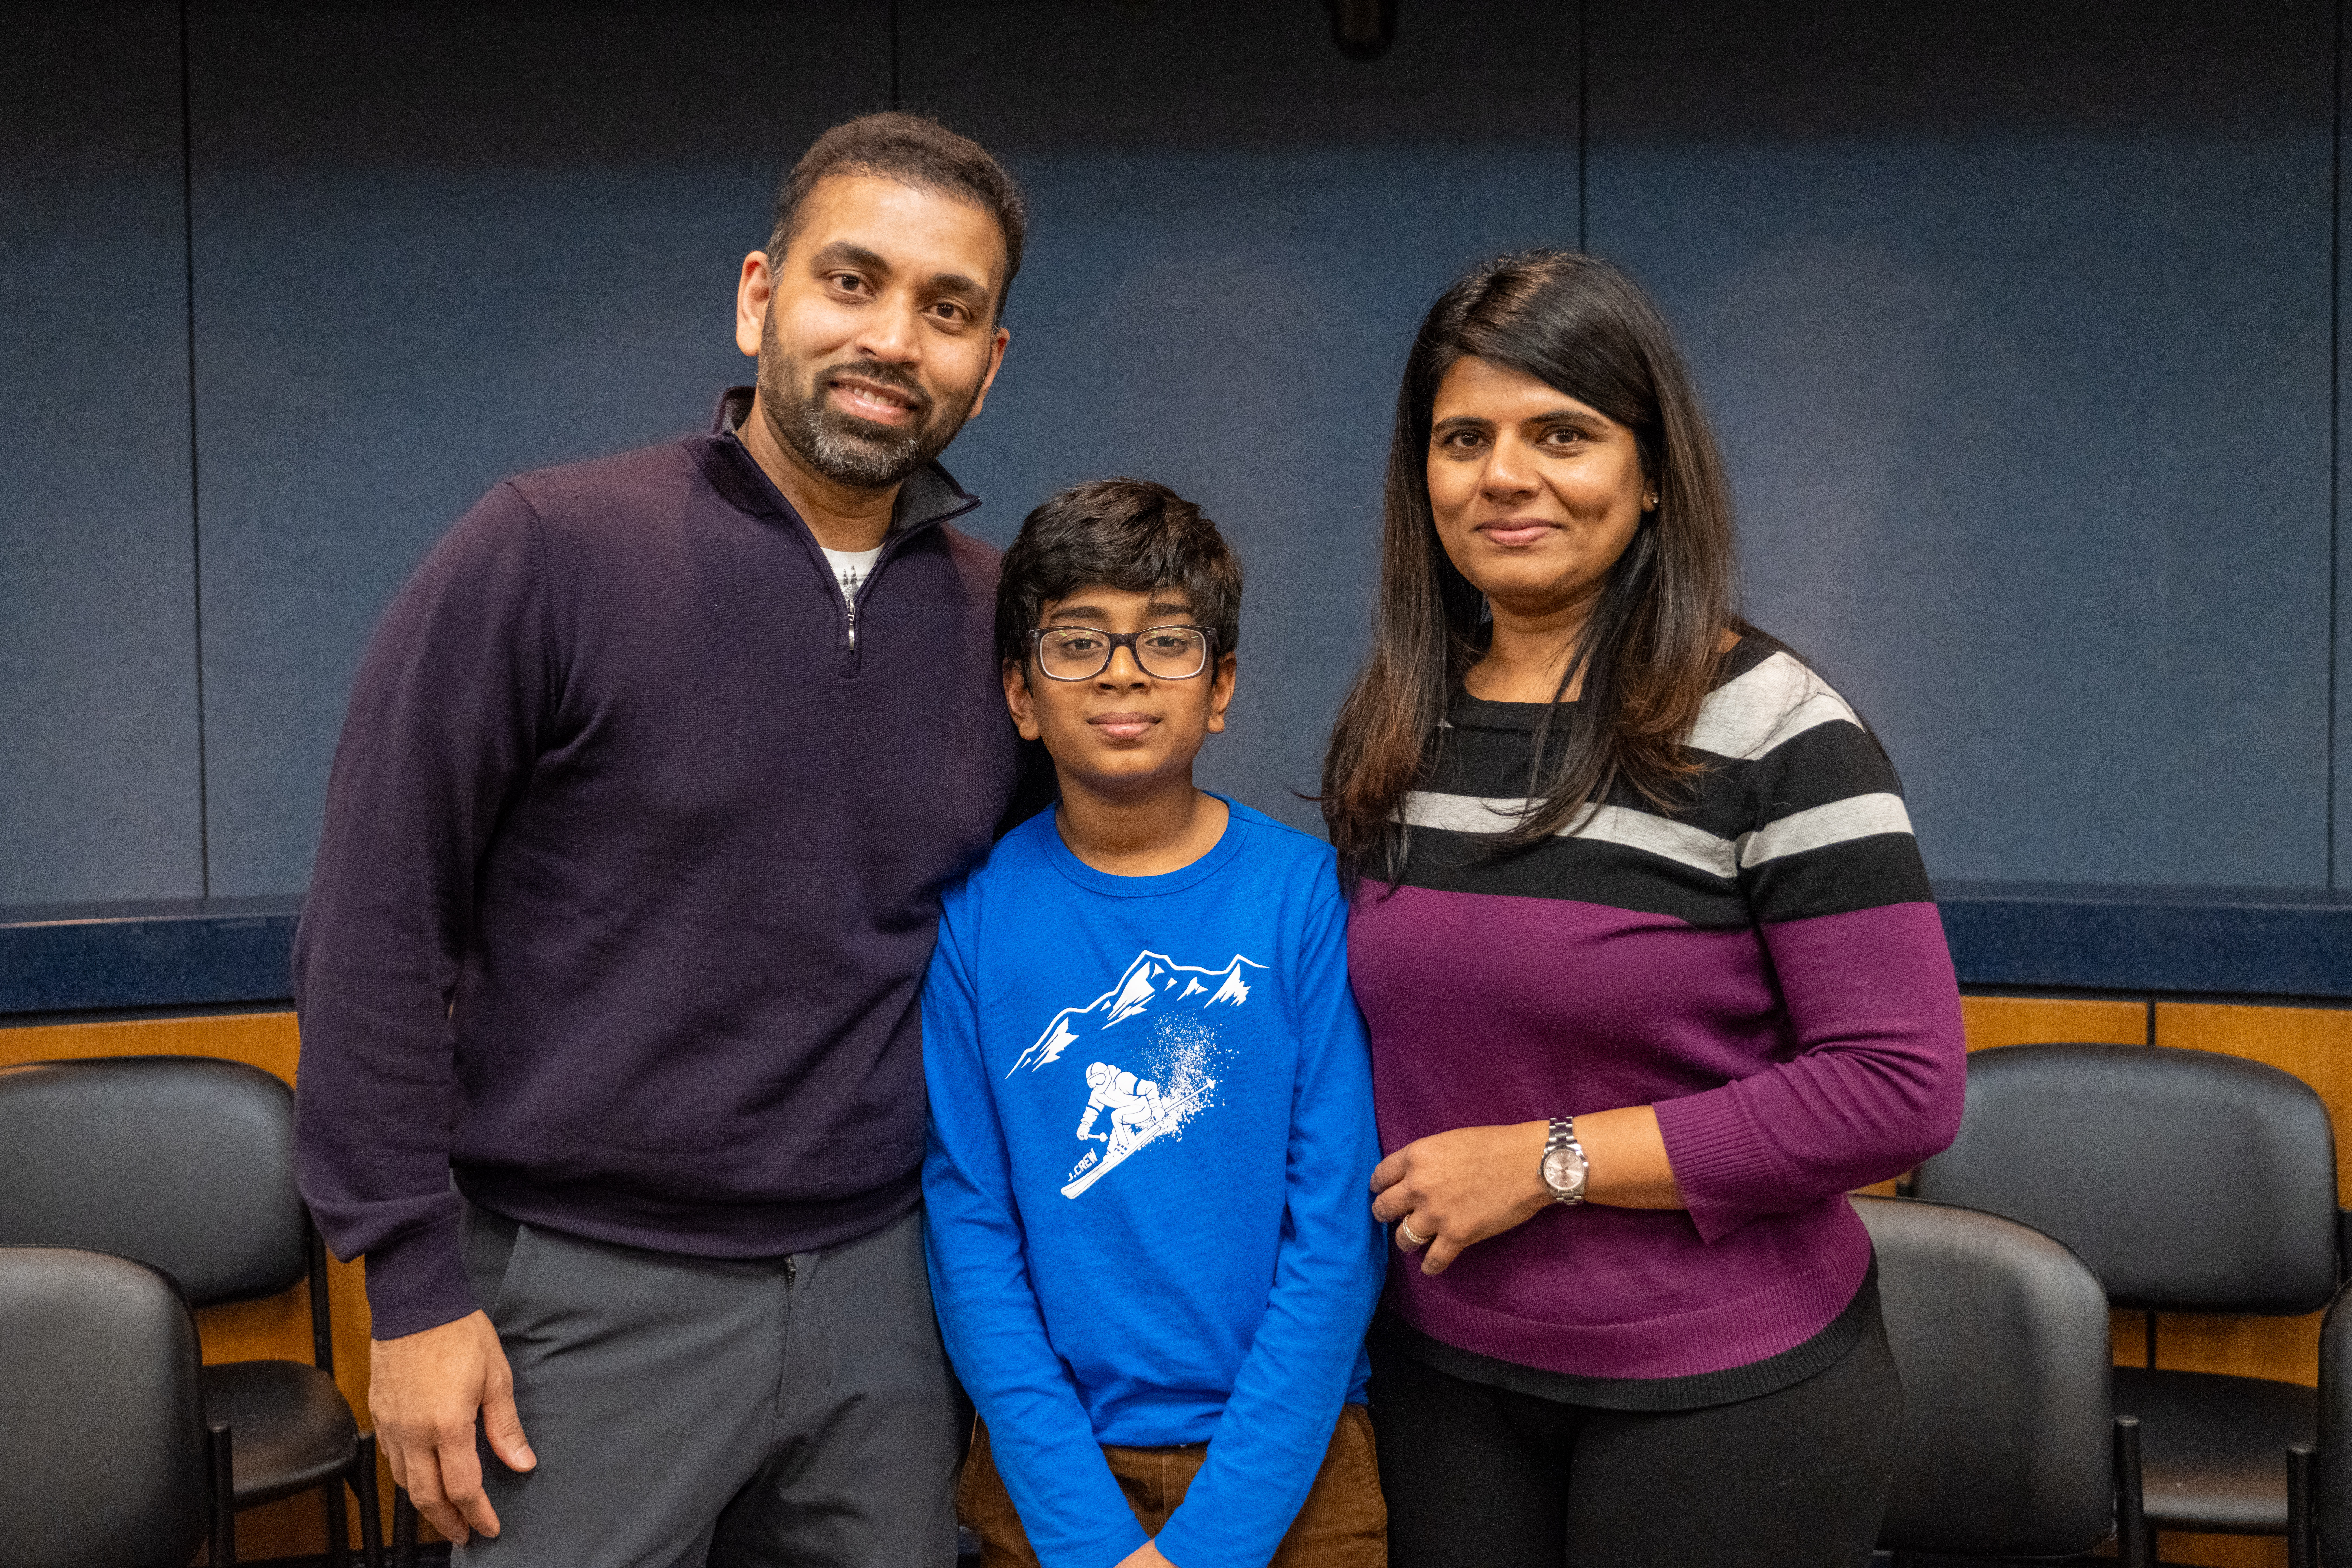 First place winner Nikhil Ganta with his parents.